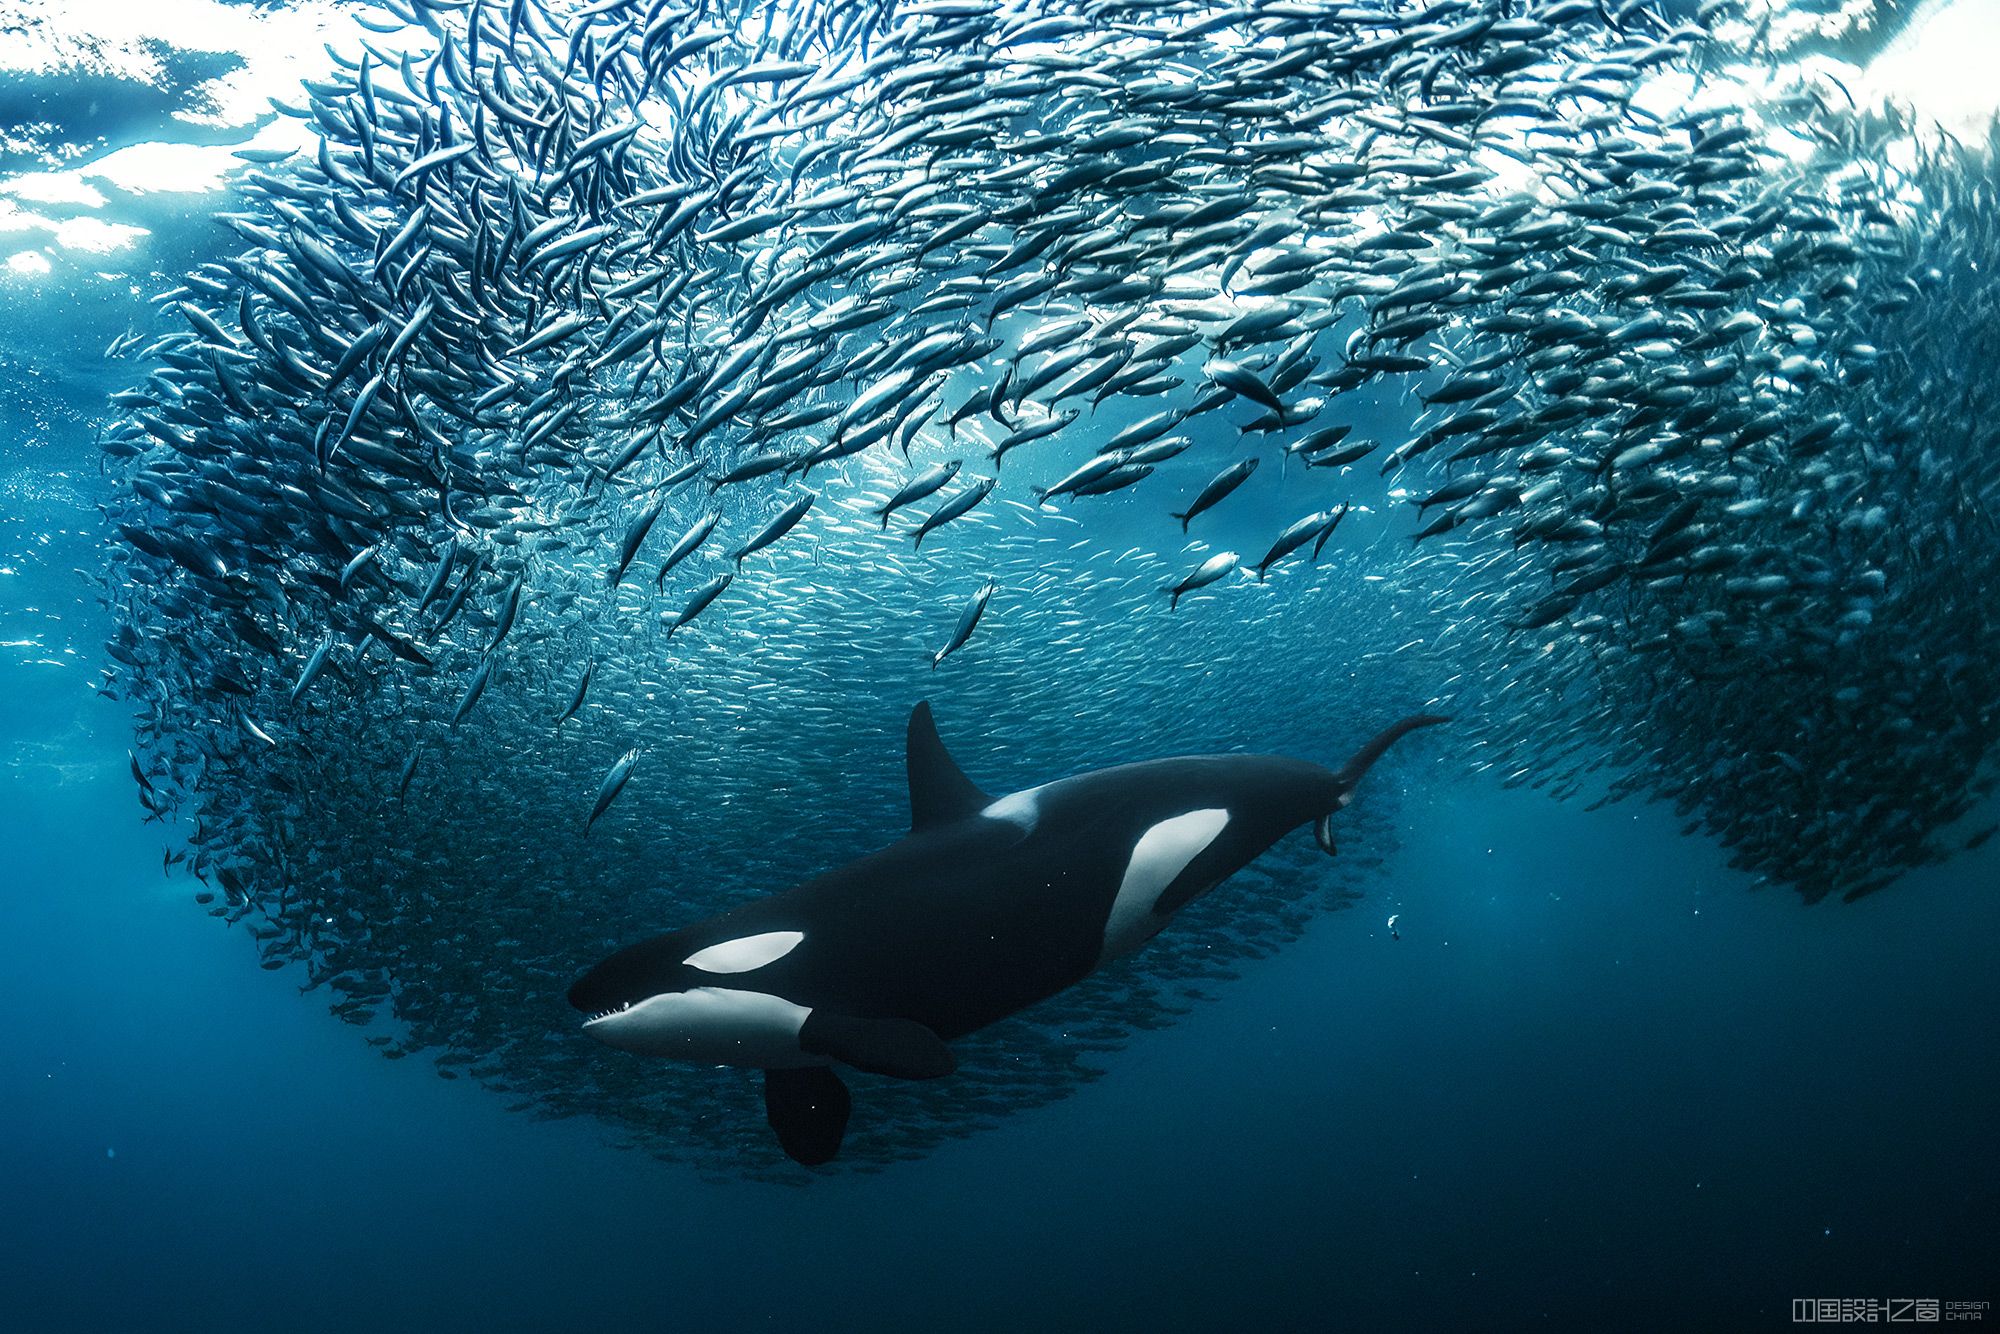 A photo of an orca surrounded by a school of fish